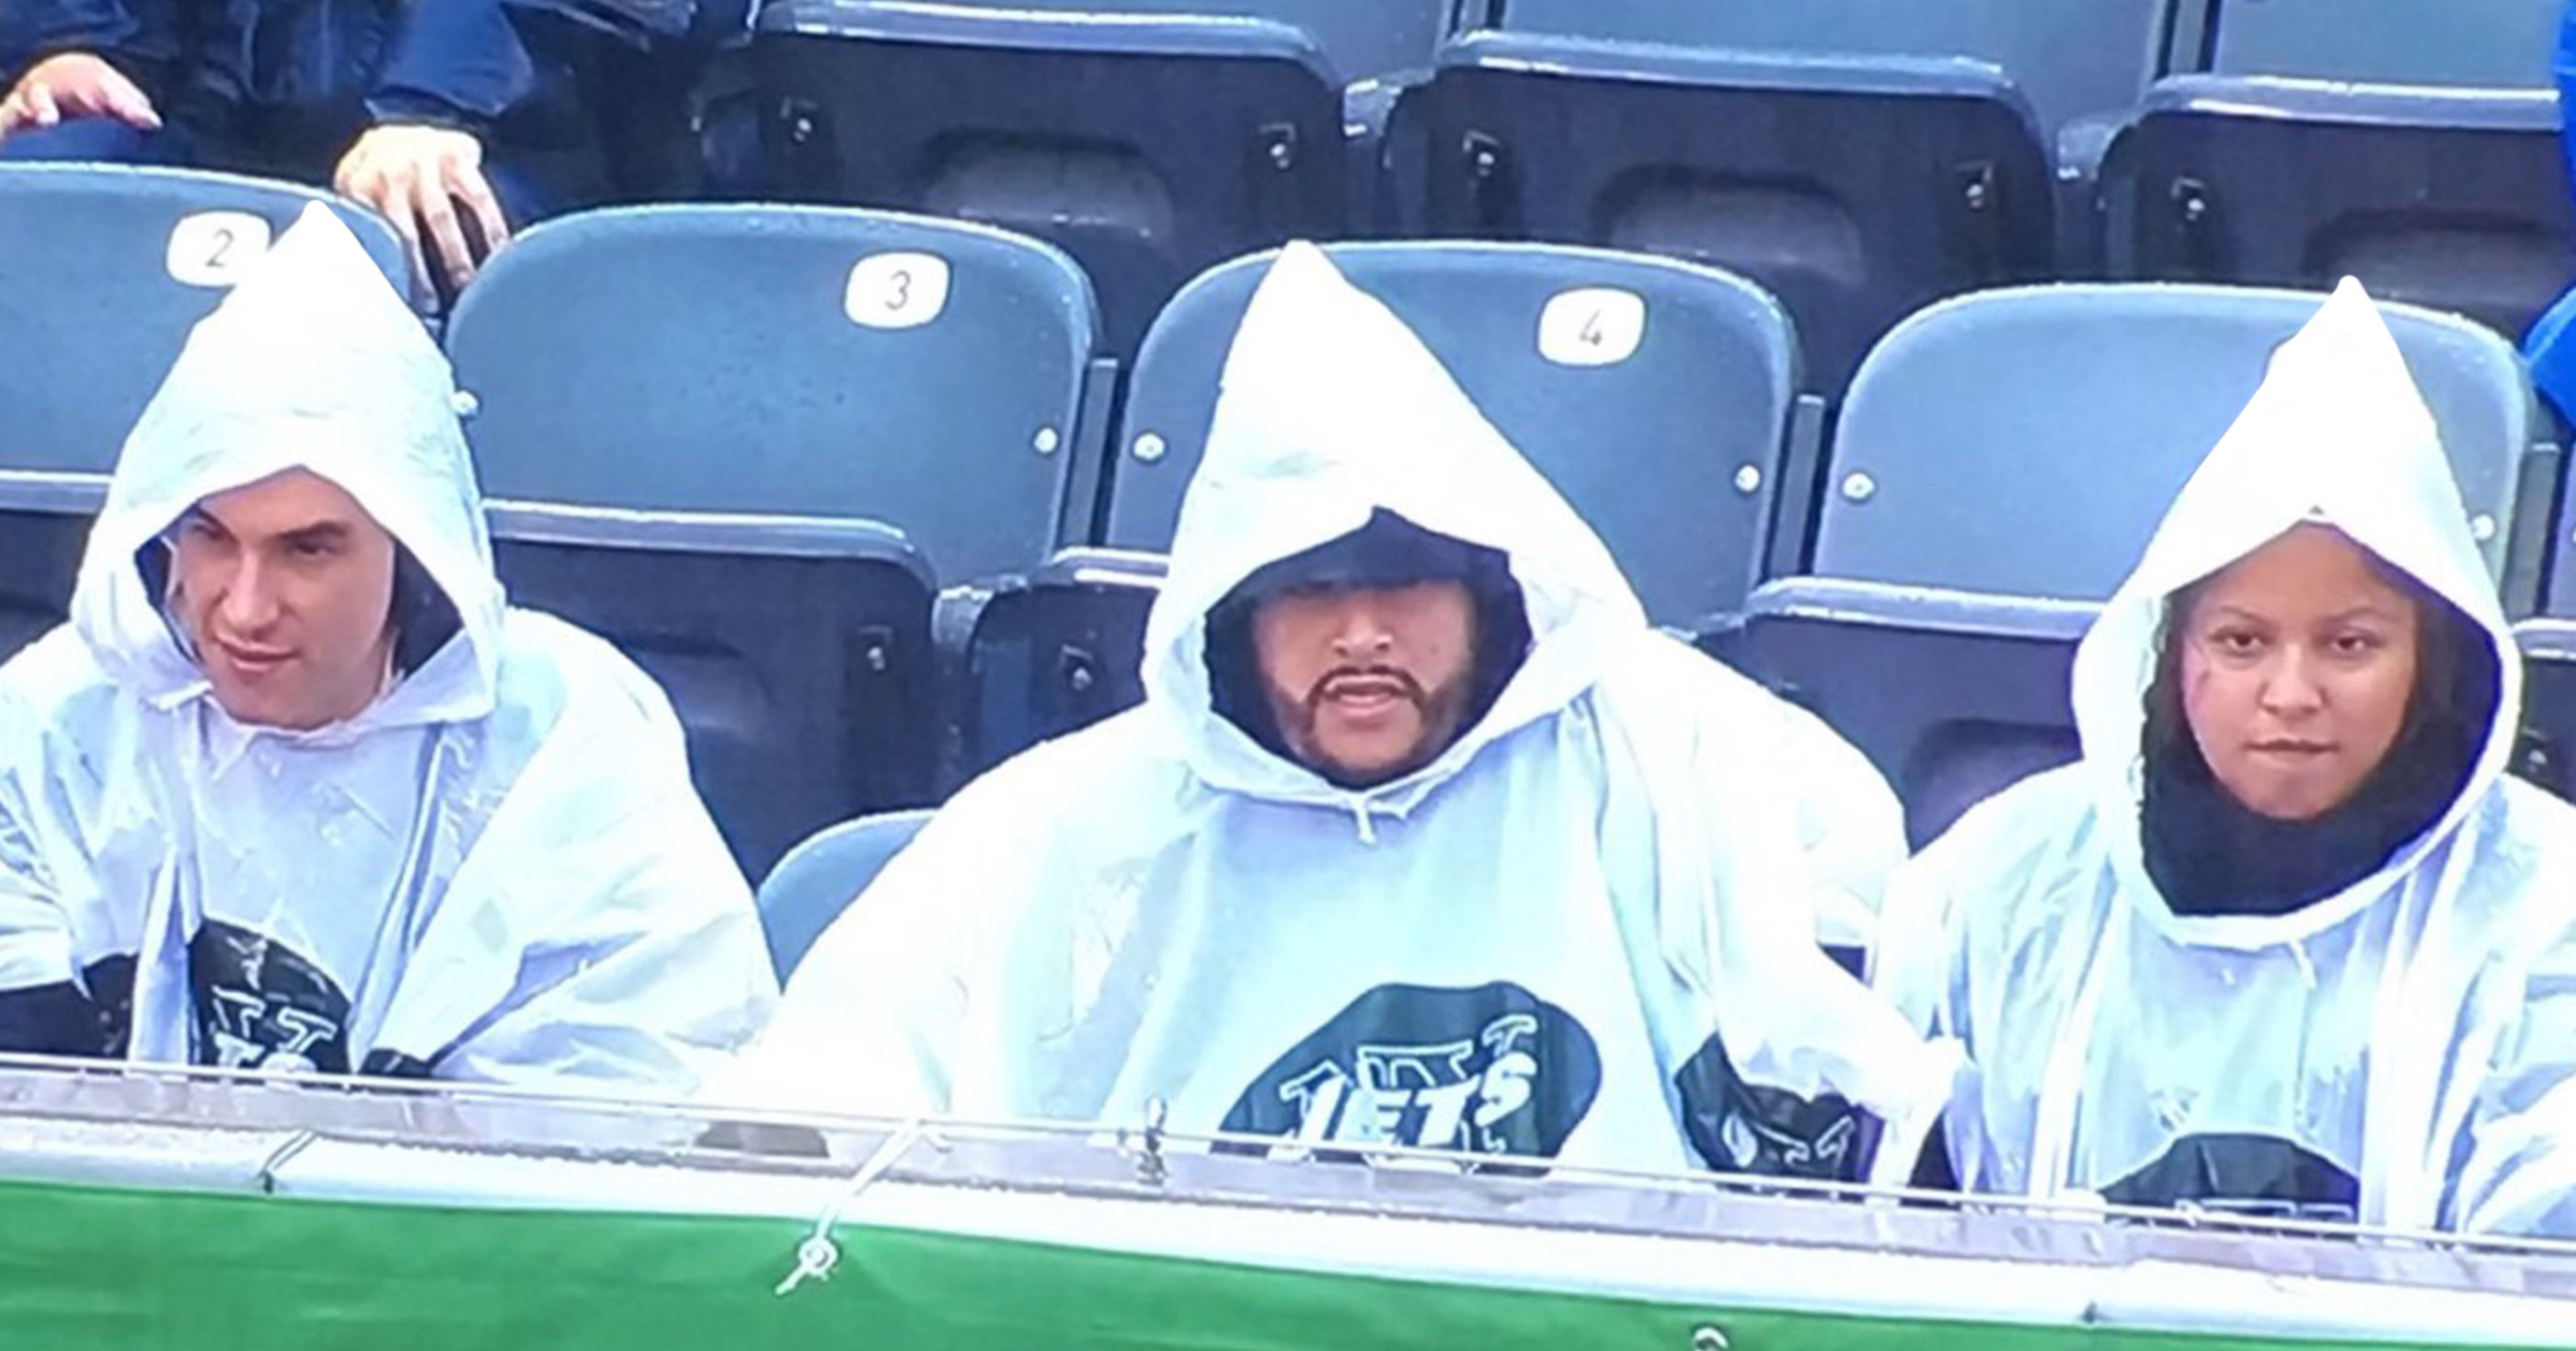 The Jets Game Looked A Lot Like A KKK Rally Because They Handed Out Pointy Hooded White Ponchos